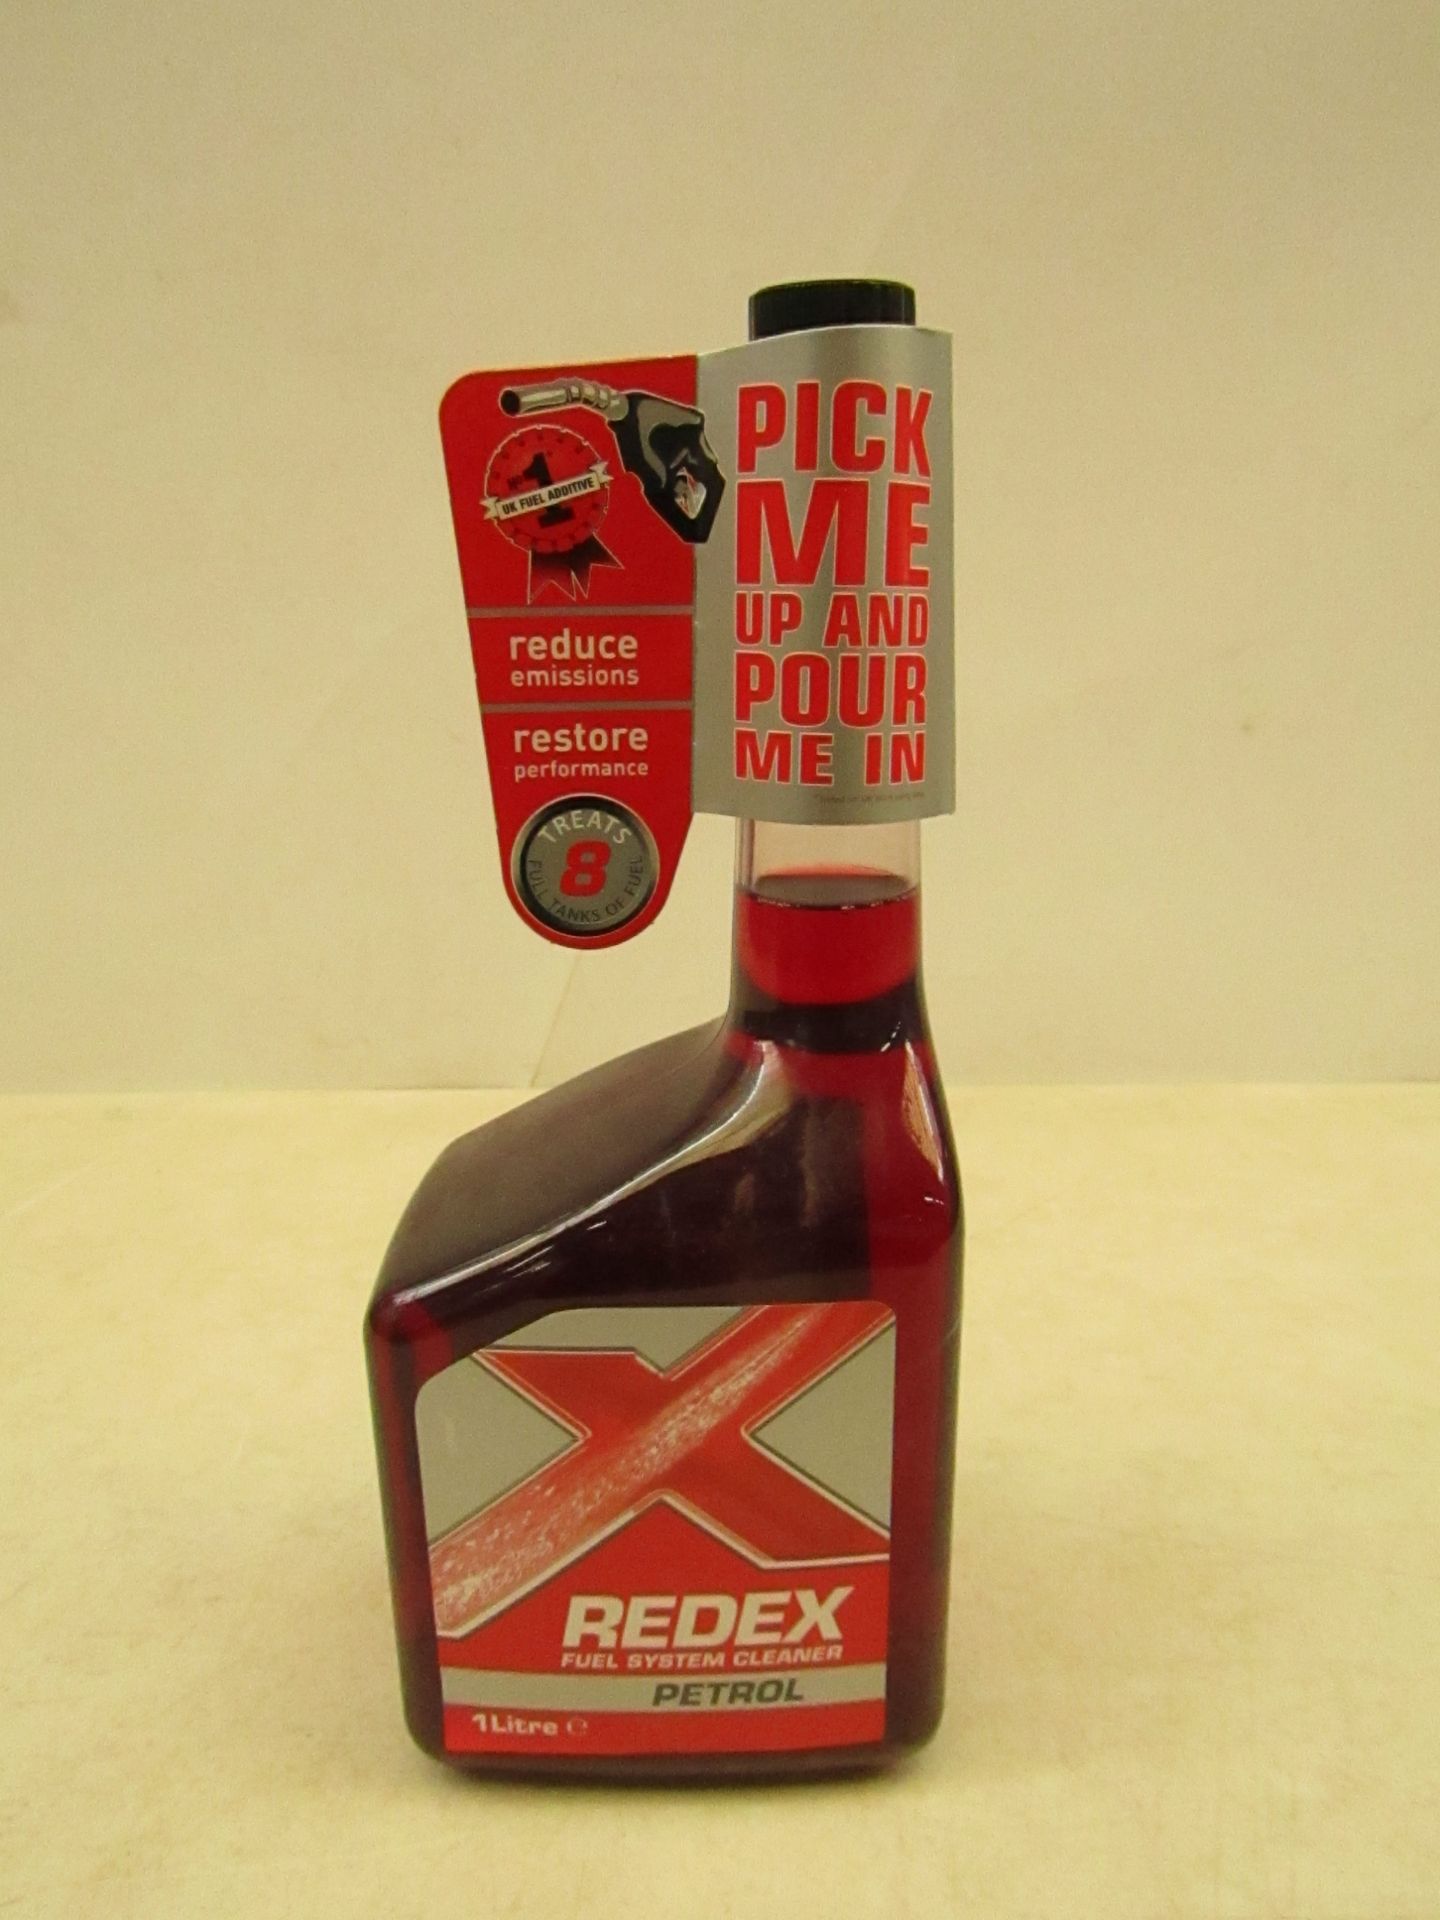 Redex fuel system cleaner, petrol, new.